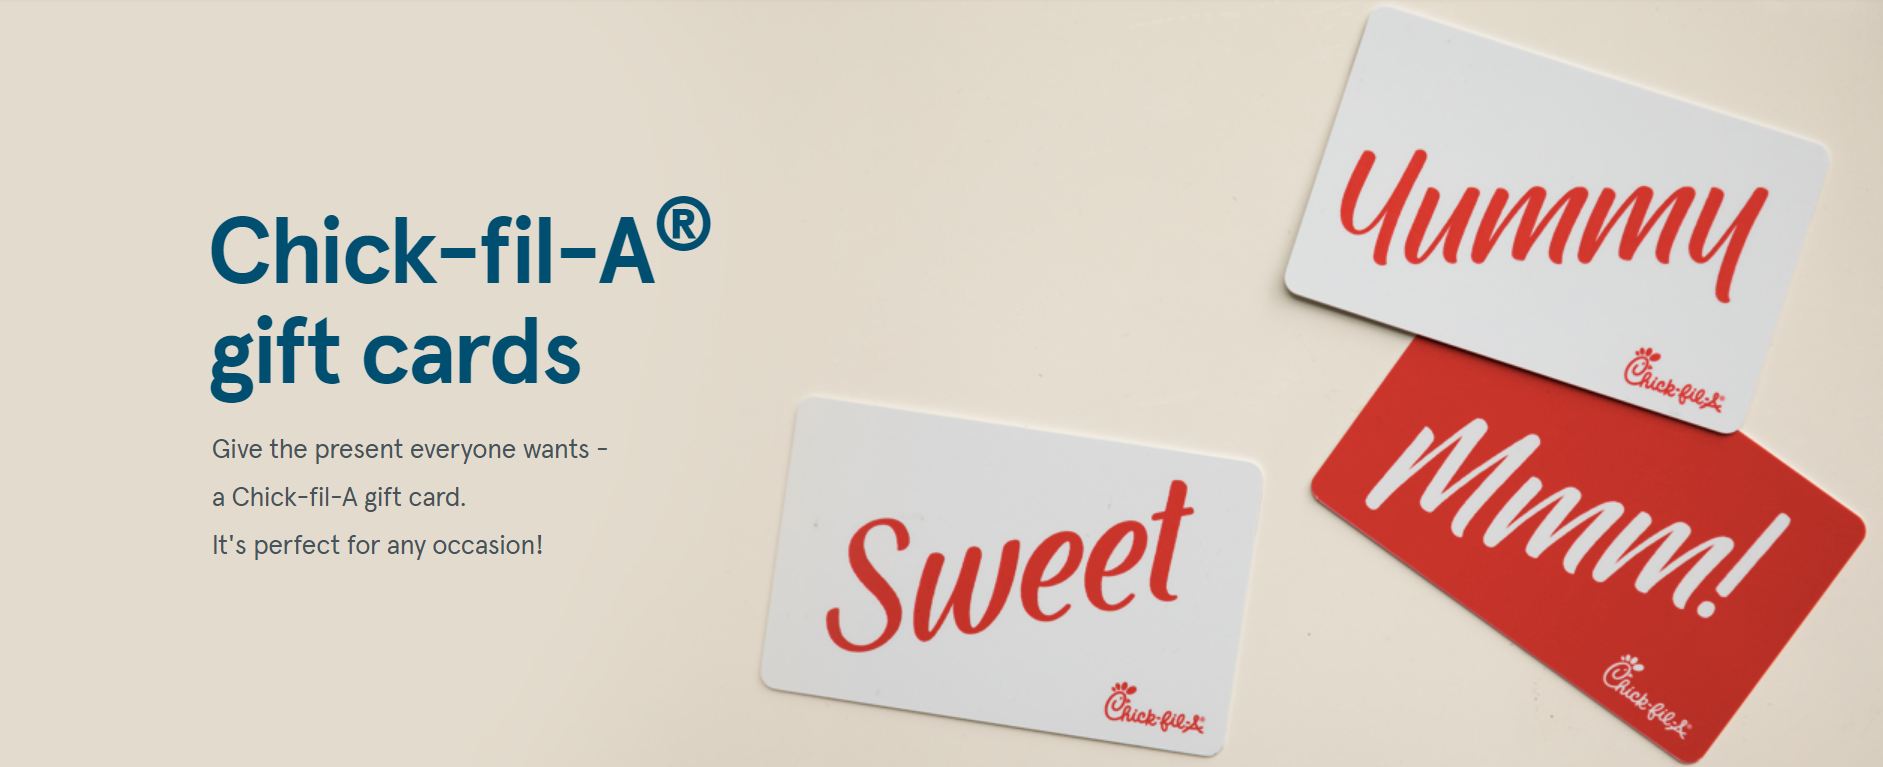 Activate Chick-Fil-A Calendar Card - Chick-Fil-A Gift Cards